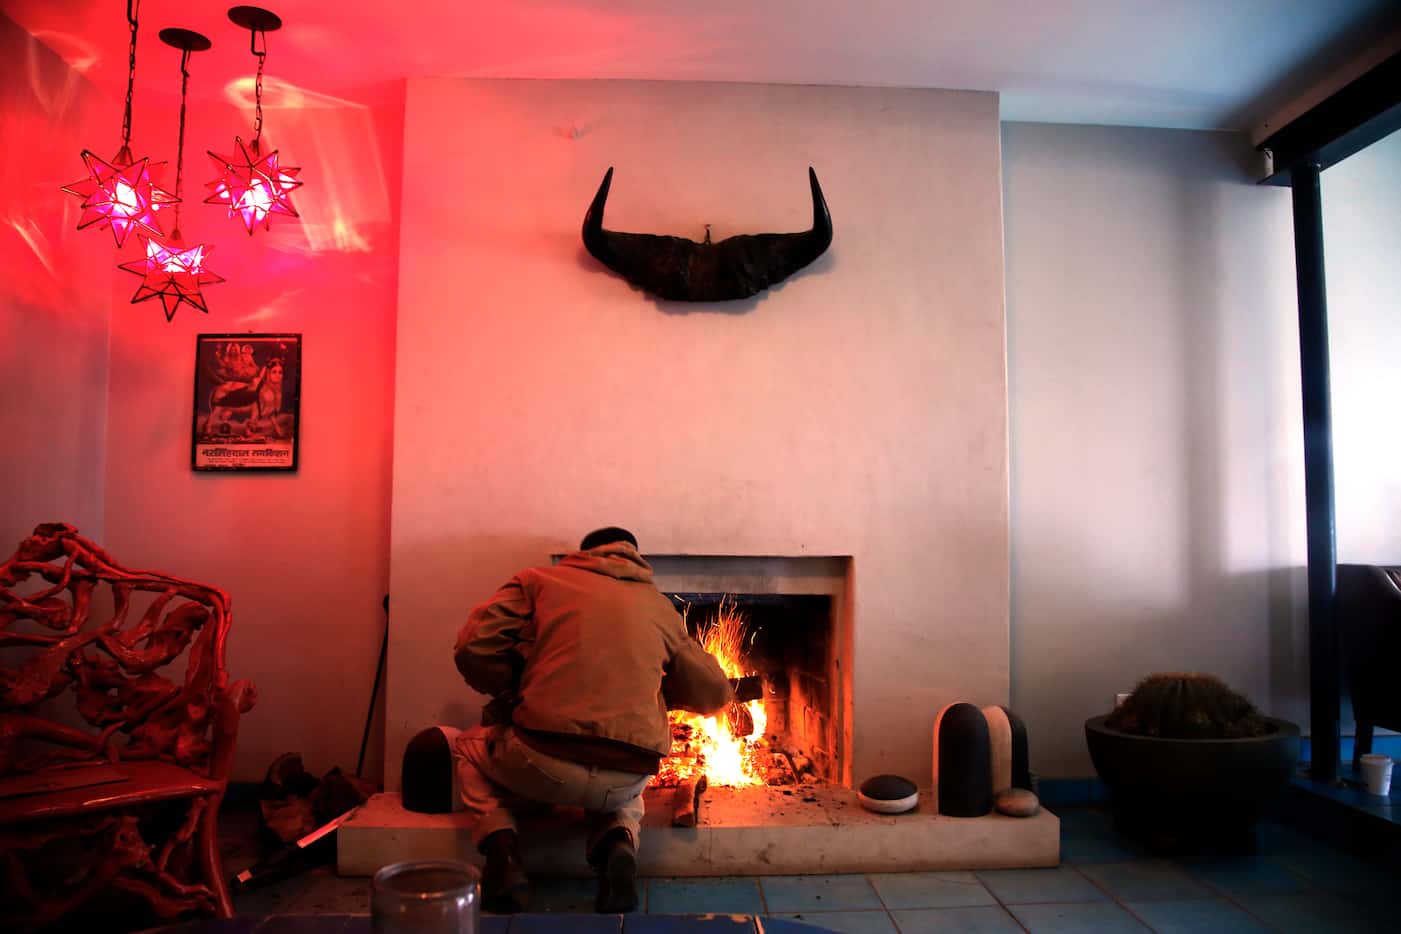 An employee adds logs to the fire in El Cosmico's lobby. (Guy Reynolds/Staff Photographer)